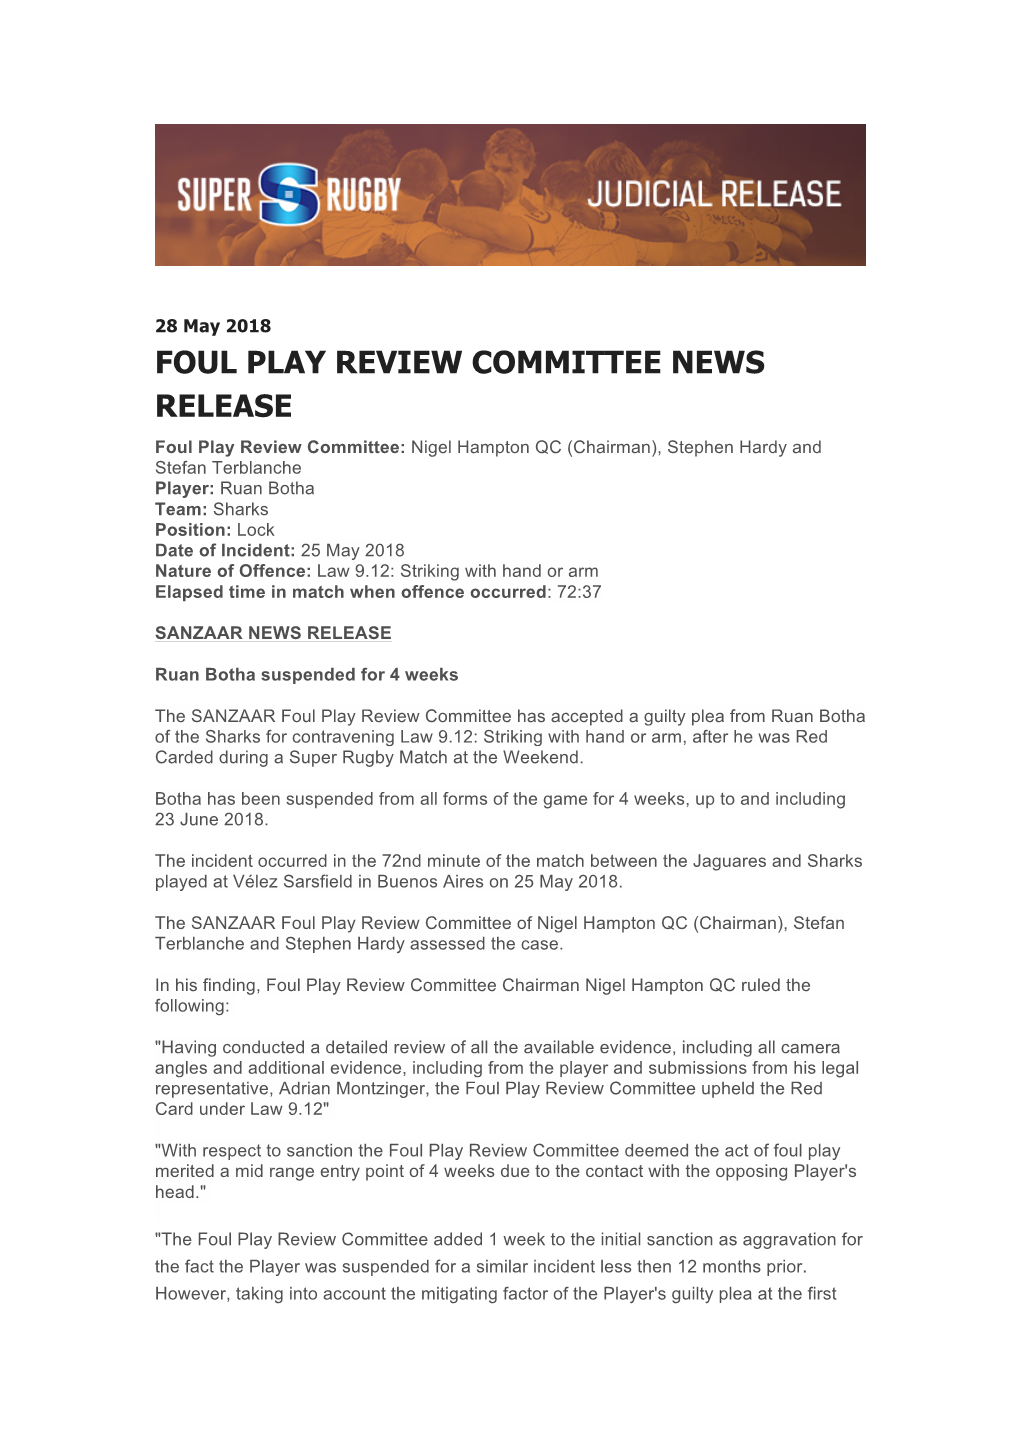 Foul Play Review Committee News Release